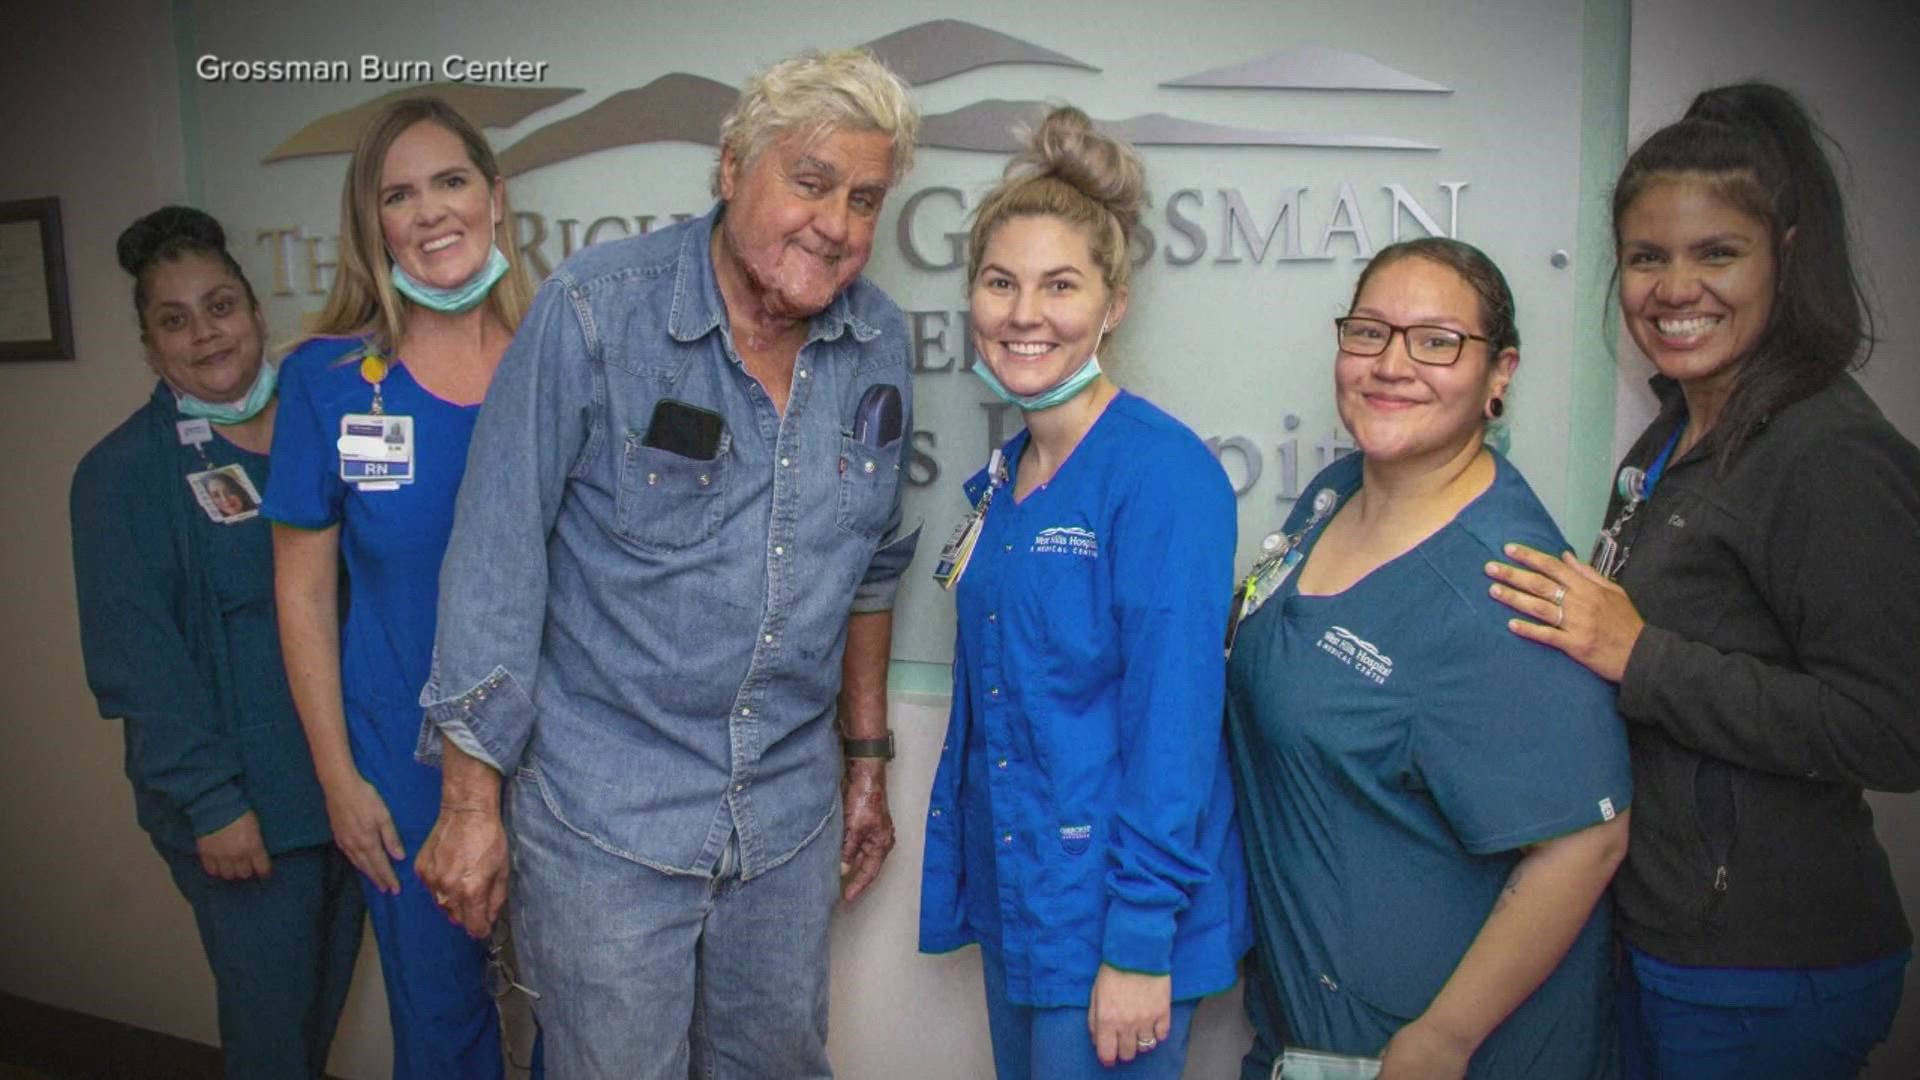 The burn center where Jay Leno was being treated shared a photo of the former "Tonight Show" host as he left the hospital.